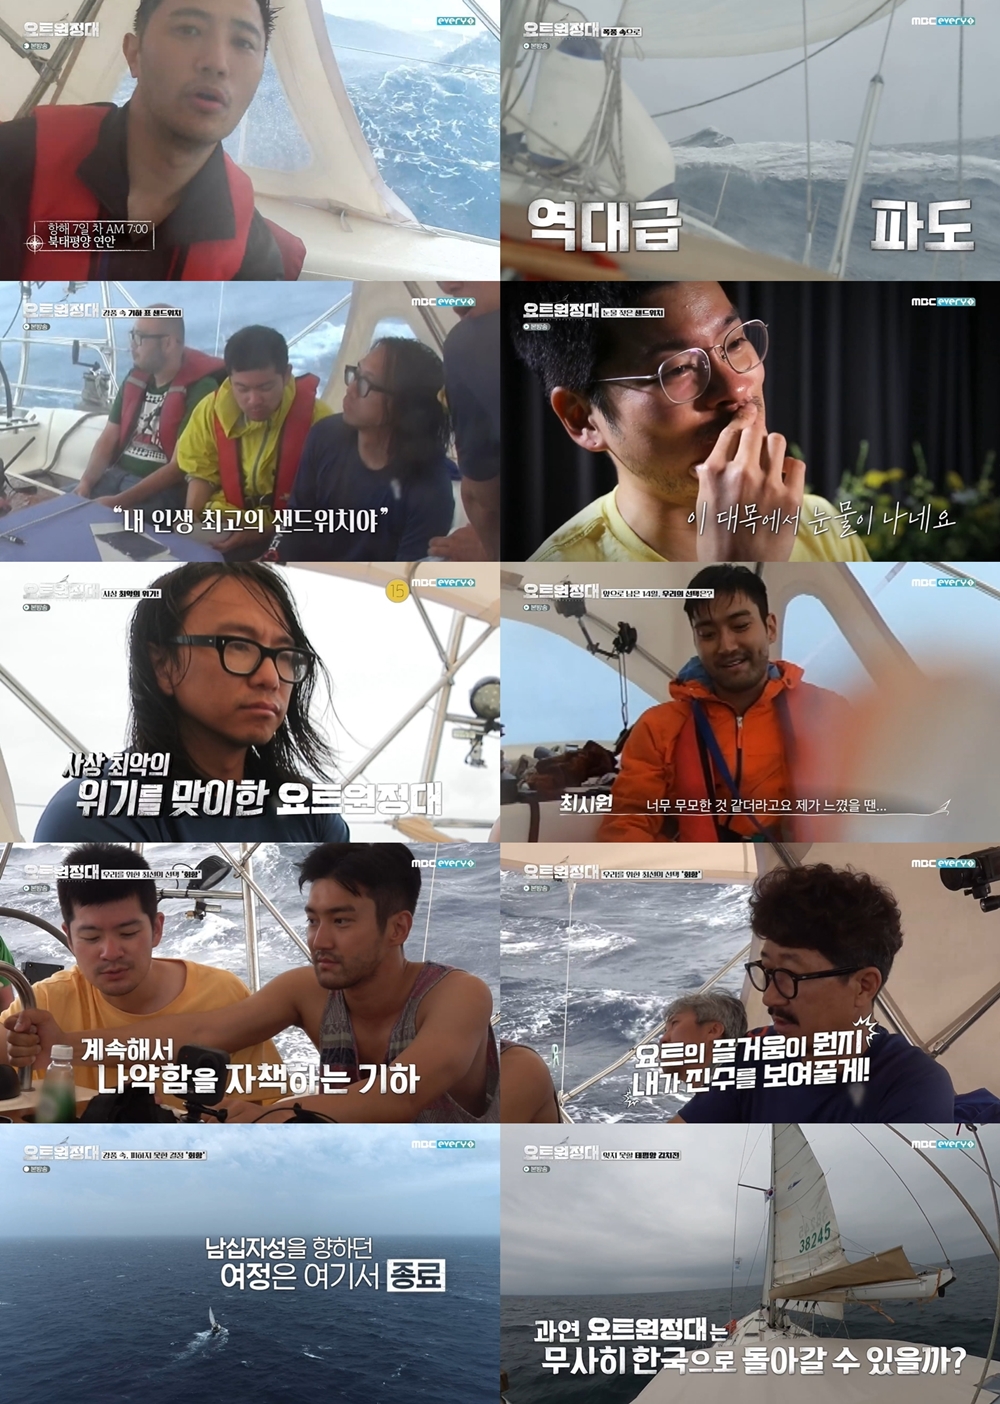 The Yot Expedition was really a Pacific Ocean real survival.In the 6th MBC Everlon Yot Expedition broadcast on the 21st, there was a picture of Jin Goo - Choi Siwon - Chang Kiha - Song Ho-joon who is driven by the extremes of the storm.The Yacht Expedition, which faced the worst weather since its voyage, sailed to survive with the previous class The Waves.The real adventure of four men who feel the power of Mother Nature through their whole body was vividly delivered to viewers, and they gathered topics on the real-time search term of the portal site throughout the broadcast.On this day, the Yot Expedition crew had to endure enormous The Waves, strong winds and extreme seasickness.The only thing the Yacht Expedition could do in the great threat of Mother Nature was to move forward, and it was the family that came to mind when it was so hard.Jin Goo attracted attention with his wife and children thinking that he was thinking about joy to win seasickness on one side of the yacht.The storm had gone on and the morning had come again, and the rain and wind that had started yesterday had become more intense, and the yacht was shaking like a flip and pushing the crew into a state of supertension.In the meantime, Chang Kiha made a sandwich, and the crew did not open the snow in the strong winds.Those who have experience that can not be done anywhere have given a different view.Chang Kiha said, The day is really memorable, he said. I ate it and it was not really delicious, but it was the best sandwich. He told the story of Jin Goos words.I was able to feel the sticky companionship of the Yot Expedition members who were comforted and strengthened in the difficult situation in the appearance of Chang Kiha.But Mother Nature was always unpredictable, and although Summertime had started with its own determination, the men were physically and mentally exhausted by the constant threat of the sea.The 5mThe Waves went back and forth; its okay to swing up and down, but when you shake from side to side, its so hard because your gaze changes, Choi Siwon recalled.Jin Goo said, The Waves are patient, not overcome, and recalled the sea that turned into fear.The mood has become serious in this situation.With support lines out of touch, Captain Kim Seung-jin suggested continuing, and Chang Kiha asked for a stop to shoot, with Jin Goo saying, The point crew is getting stressed and physical pain is piled up, and it seems time to make a decision for a pleasant voyage.Chang Kiha said, We are aiming to go to the South Cross, but we have already achieved a lot. I think it is also a way to reduce the route.Captain Kim Seung-jin decided to return to the port for the safety of all, and the crew felt a sense of defeat that they had given up their goals with a sorry heart, and the yacht was in a bad mood.Captain Kim Seung-jin encouraged the crew, saying, We are not lost, and There are many things that can not be done when we live.I read their minds and feelings in conversation with the crew.  How about going back, its okay, lets turn our atmosphere from adventure to pleasure. The Yot Expedition, which departed with the swollen dream of the Pacific Ocean voyage, decided to return, but this process was also part of the adventure.In the unpredictable sea situation, Yot Expedition has been building teamwork together and has been able to get experiences and enlightenment that have not been done anywhere.The appearance of the Yot Expedition, which is newly moving along with a strong fighting, has raised expectations about whether they will be able to return to Korea safely and what pleasure they will find in this process.